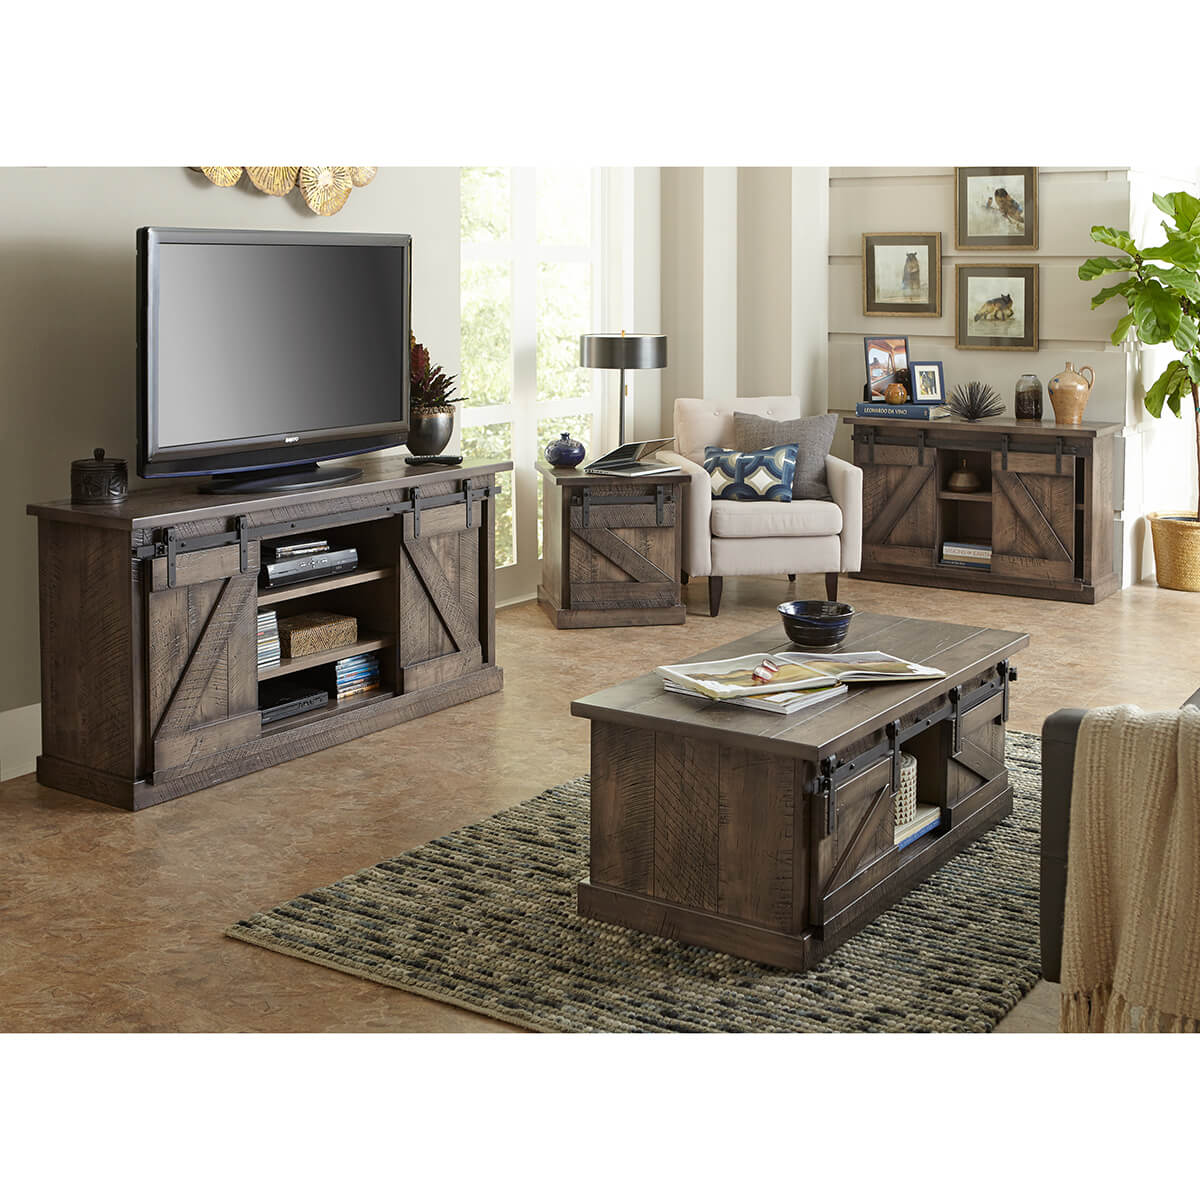 Read more about the article Durango Living Room Collection